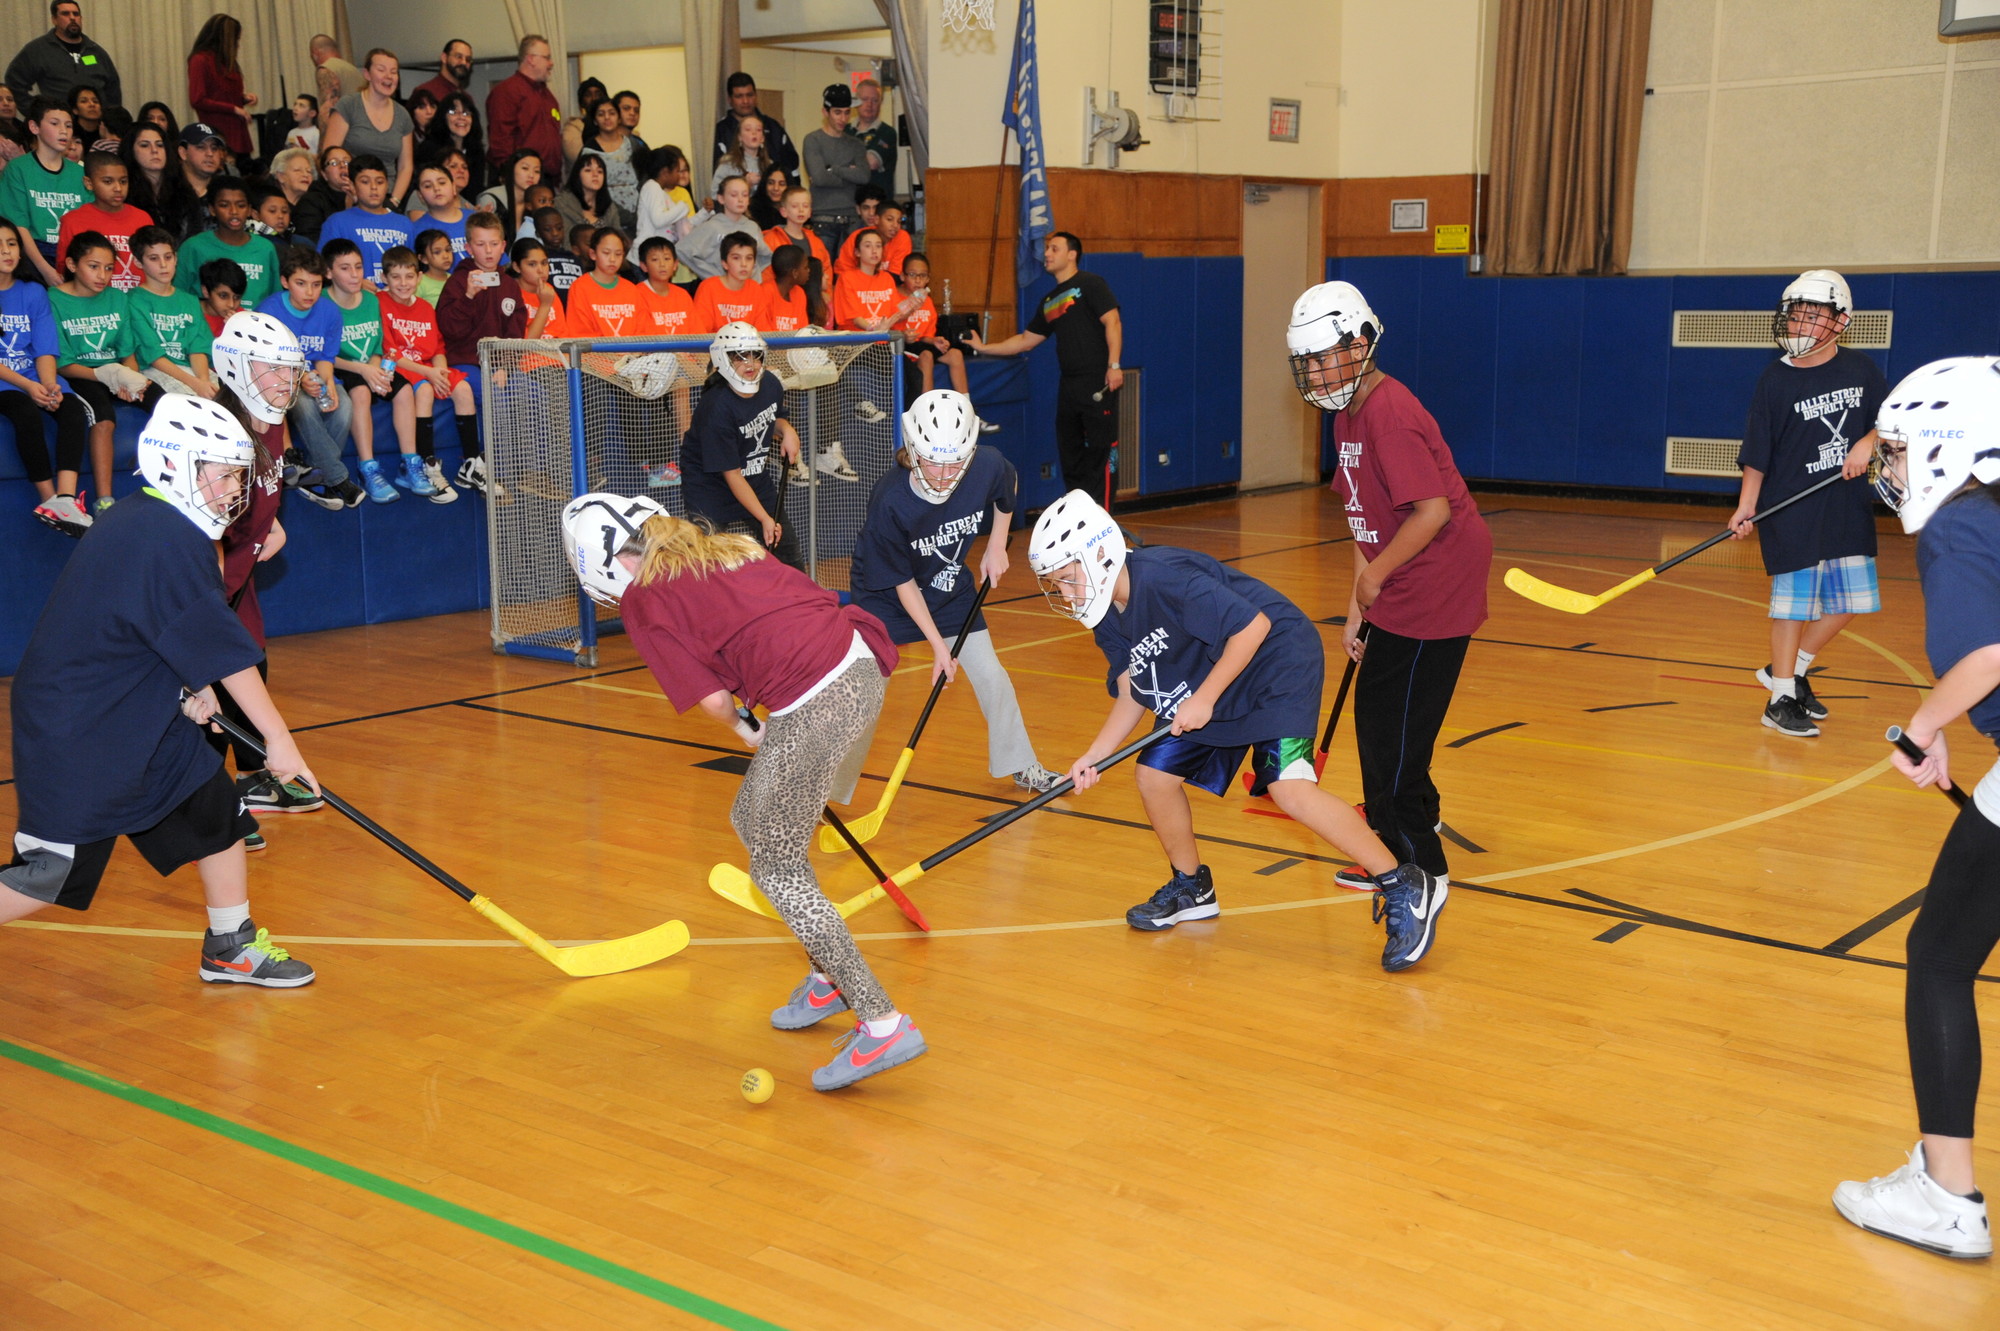 Teams from each of the three elementary schools competed.